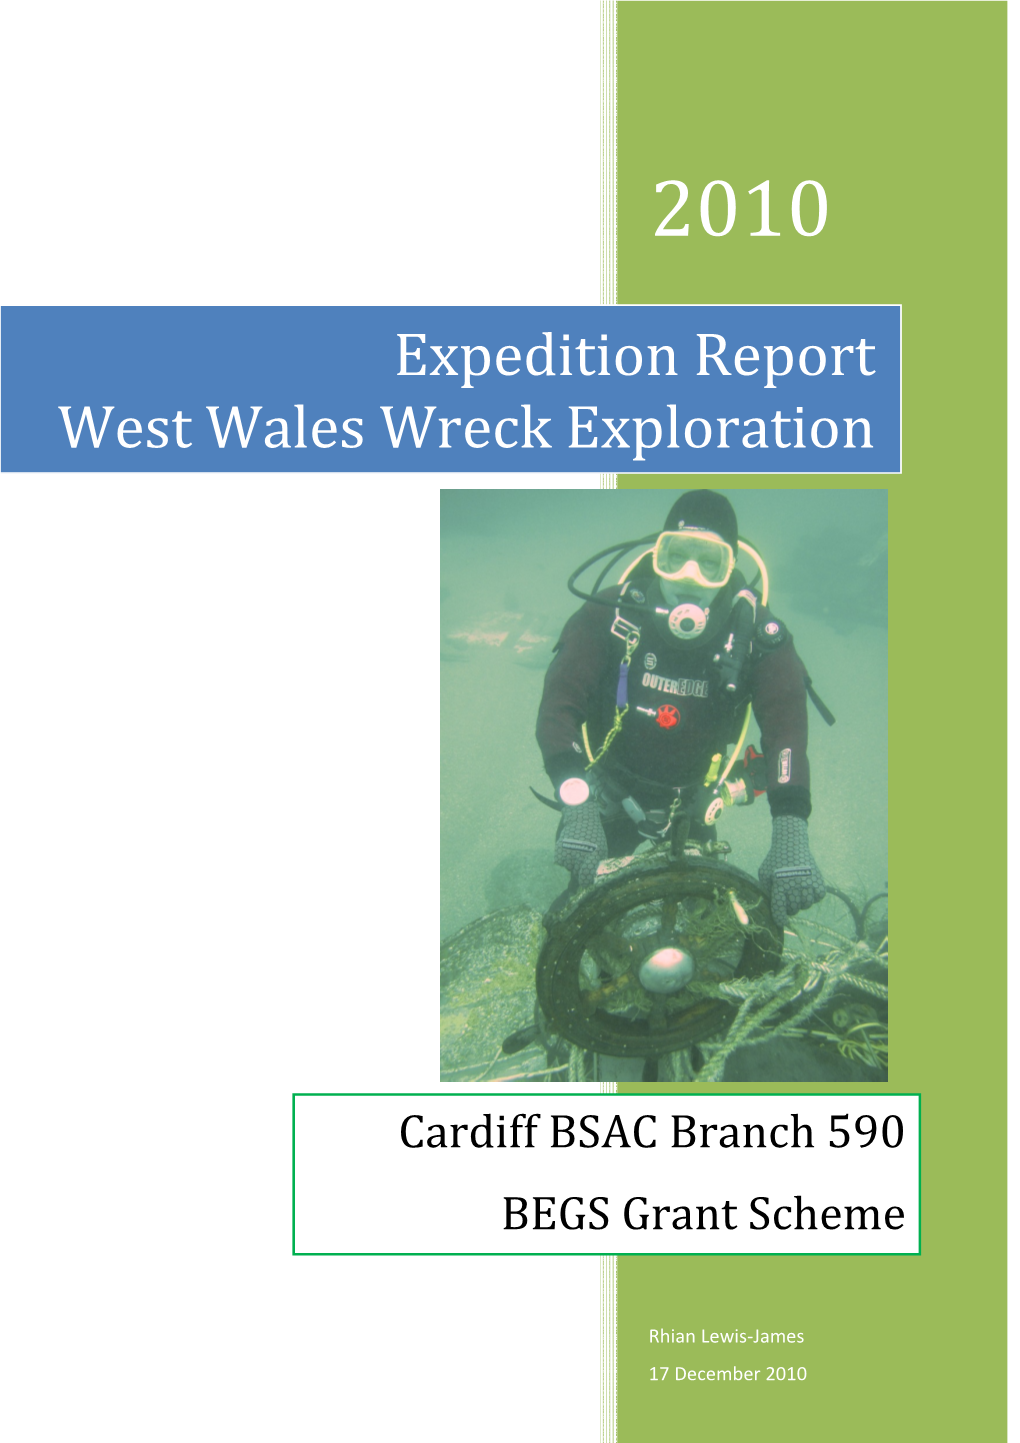 Expedition Report West Wales Wreck Exploration